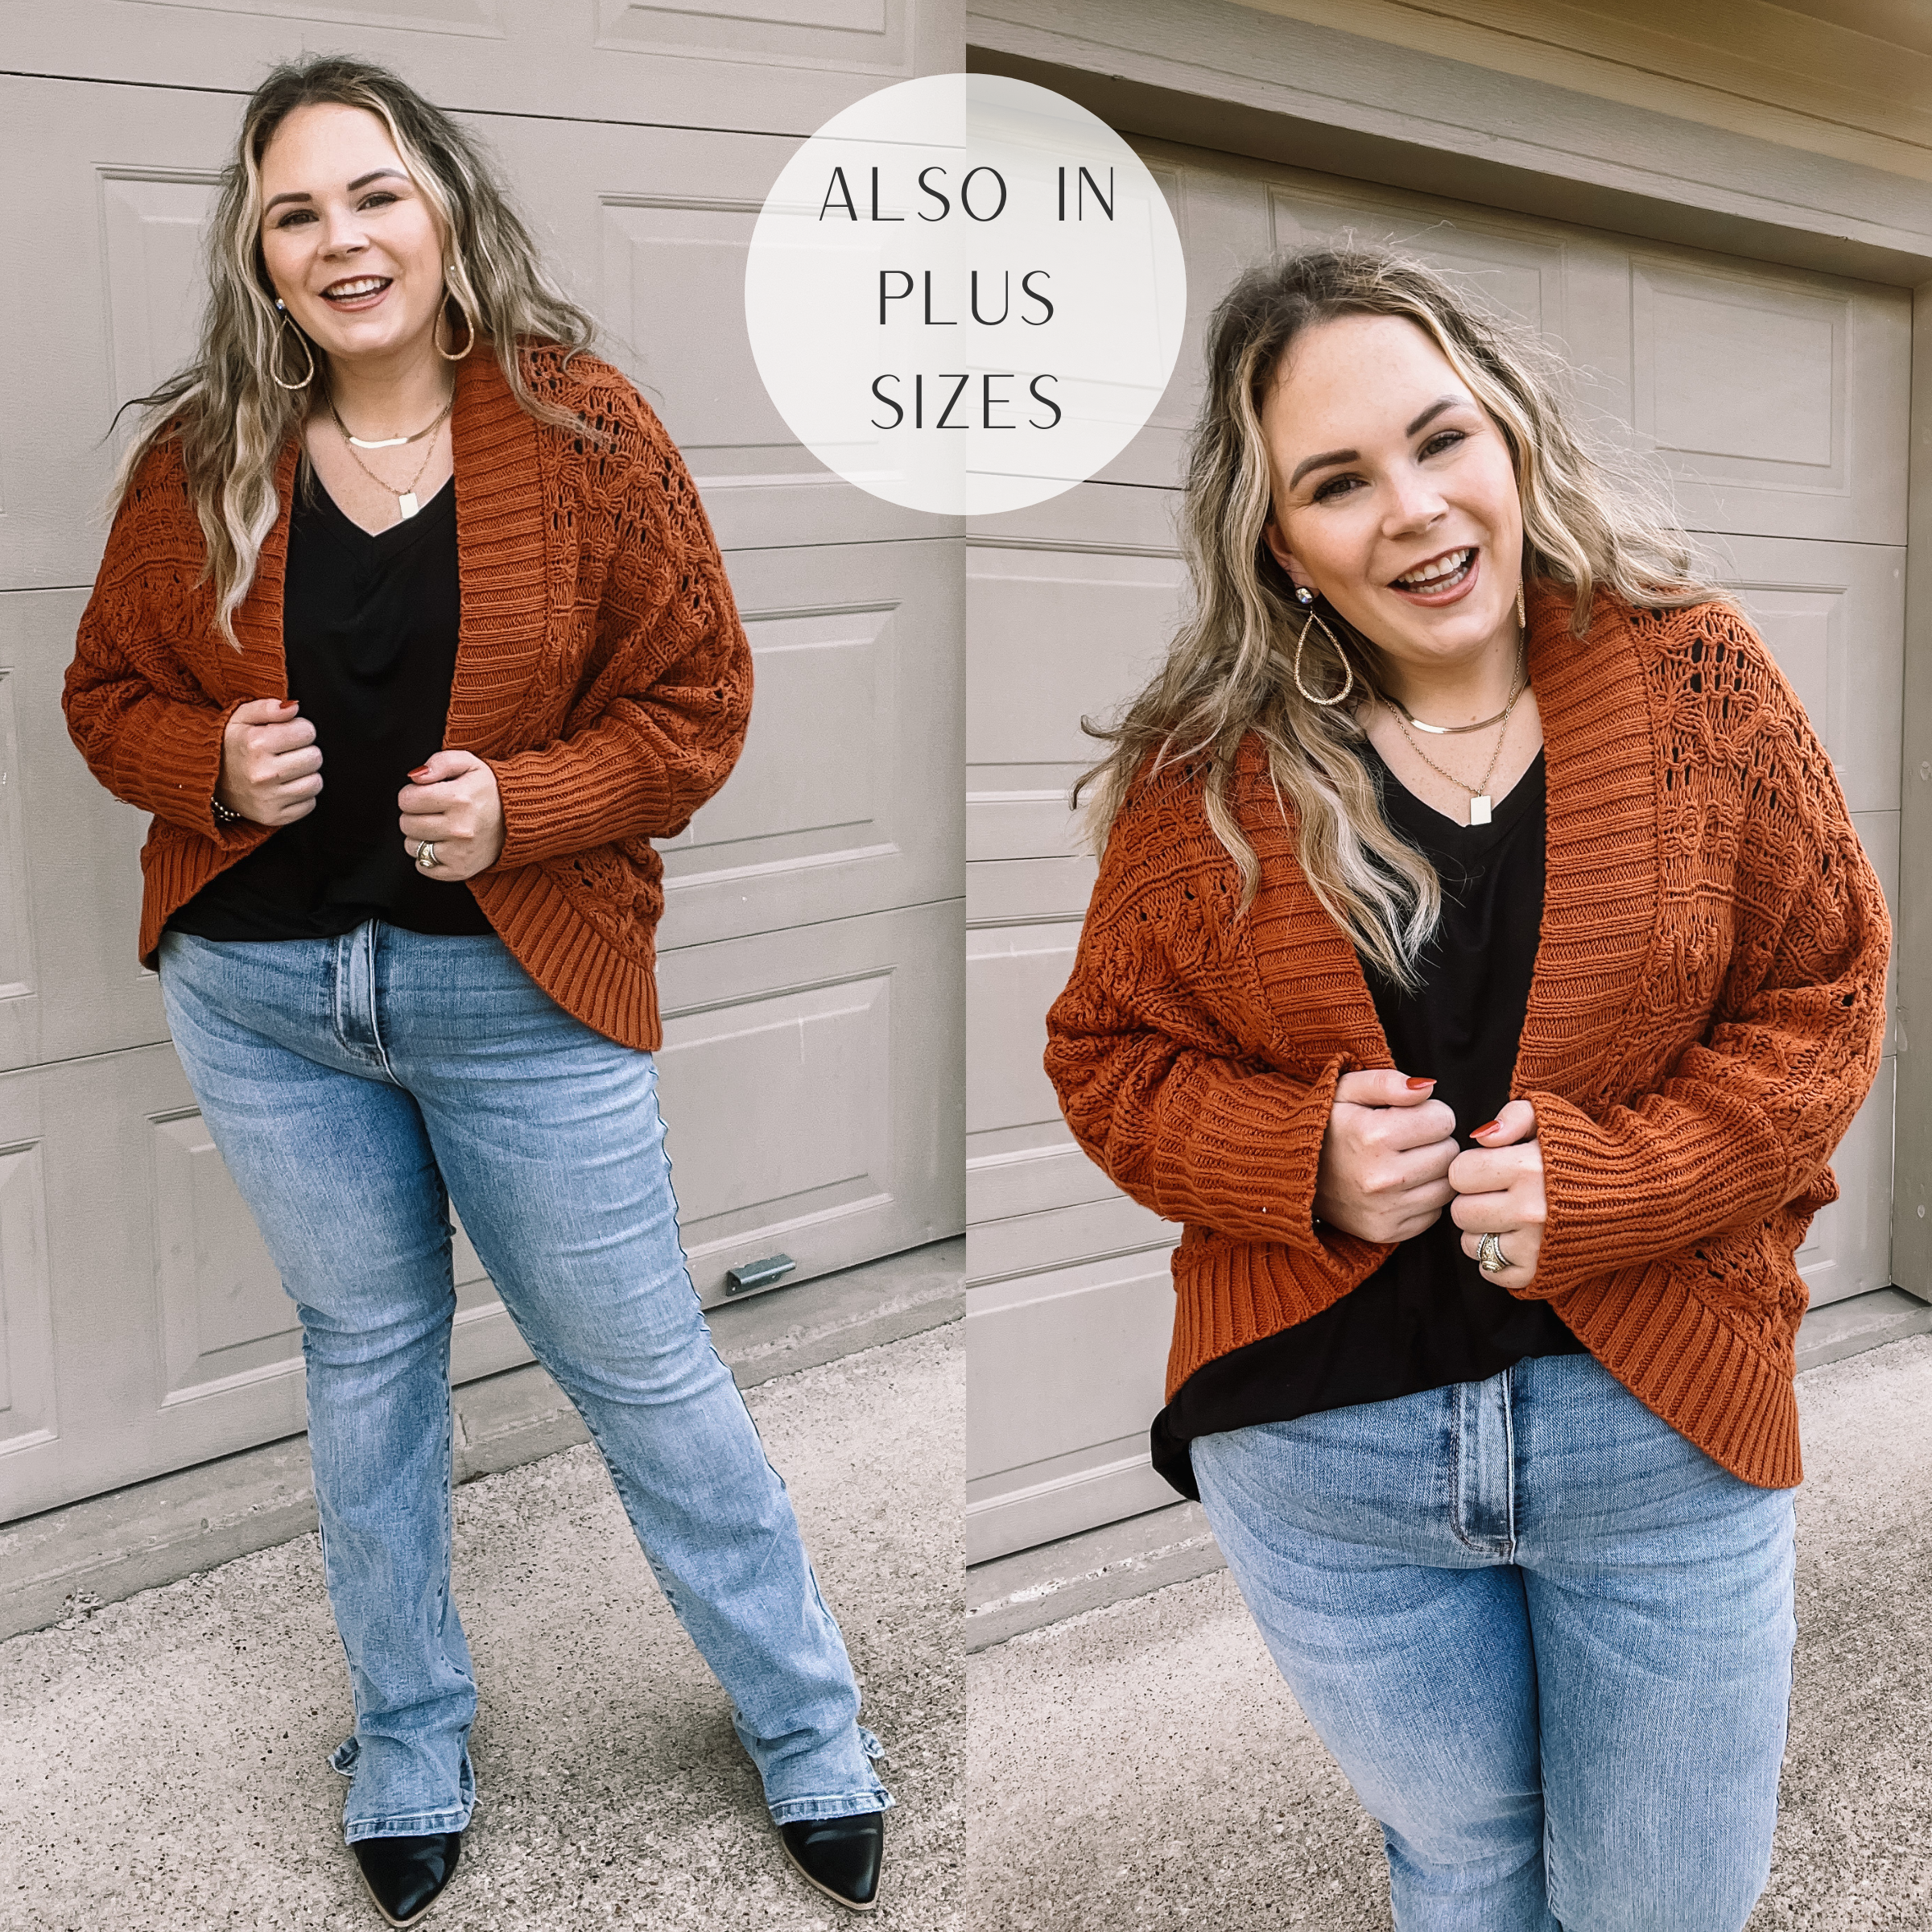 Model is wearing a rust orange cardigan with long sleeves and a loose cable knit. Model has it paired with light wash jeans, black booties, and a black top.